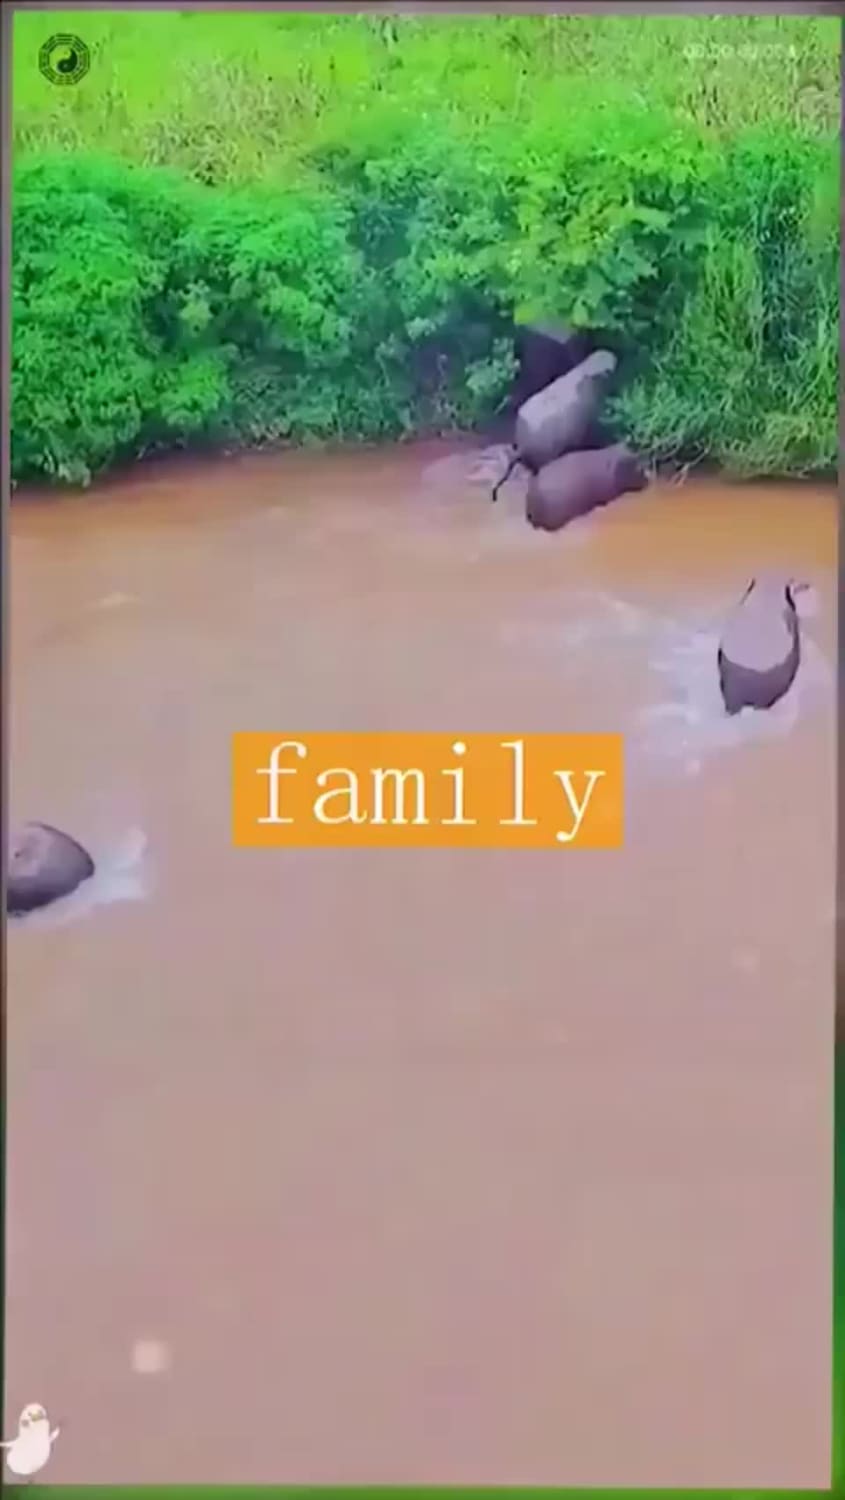 Awesome rescue of baby elephant by family...